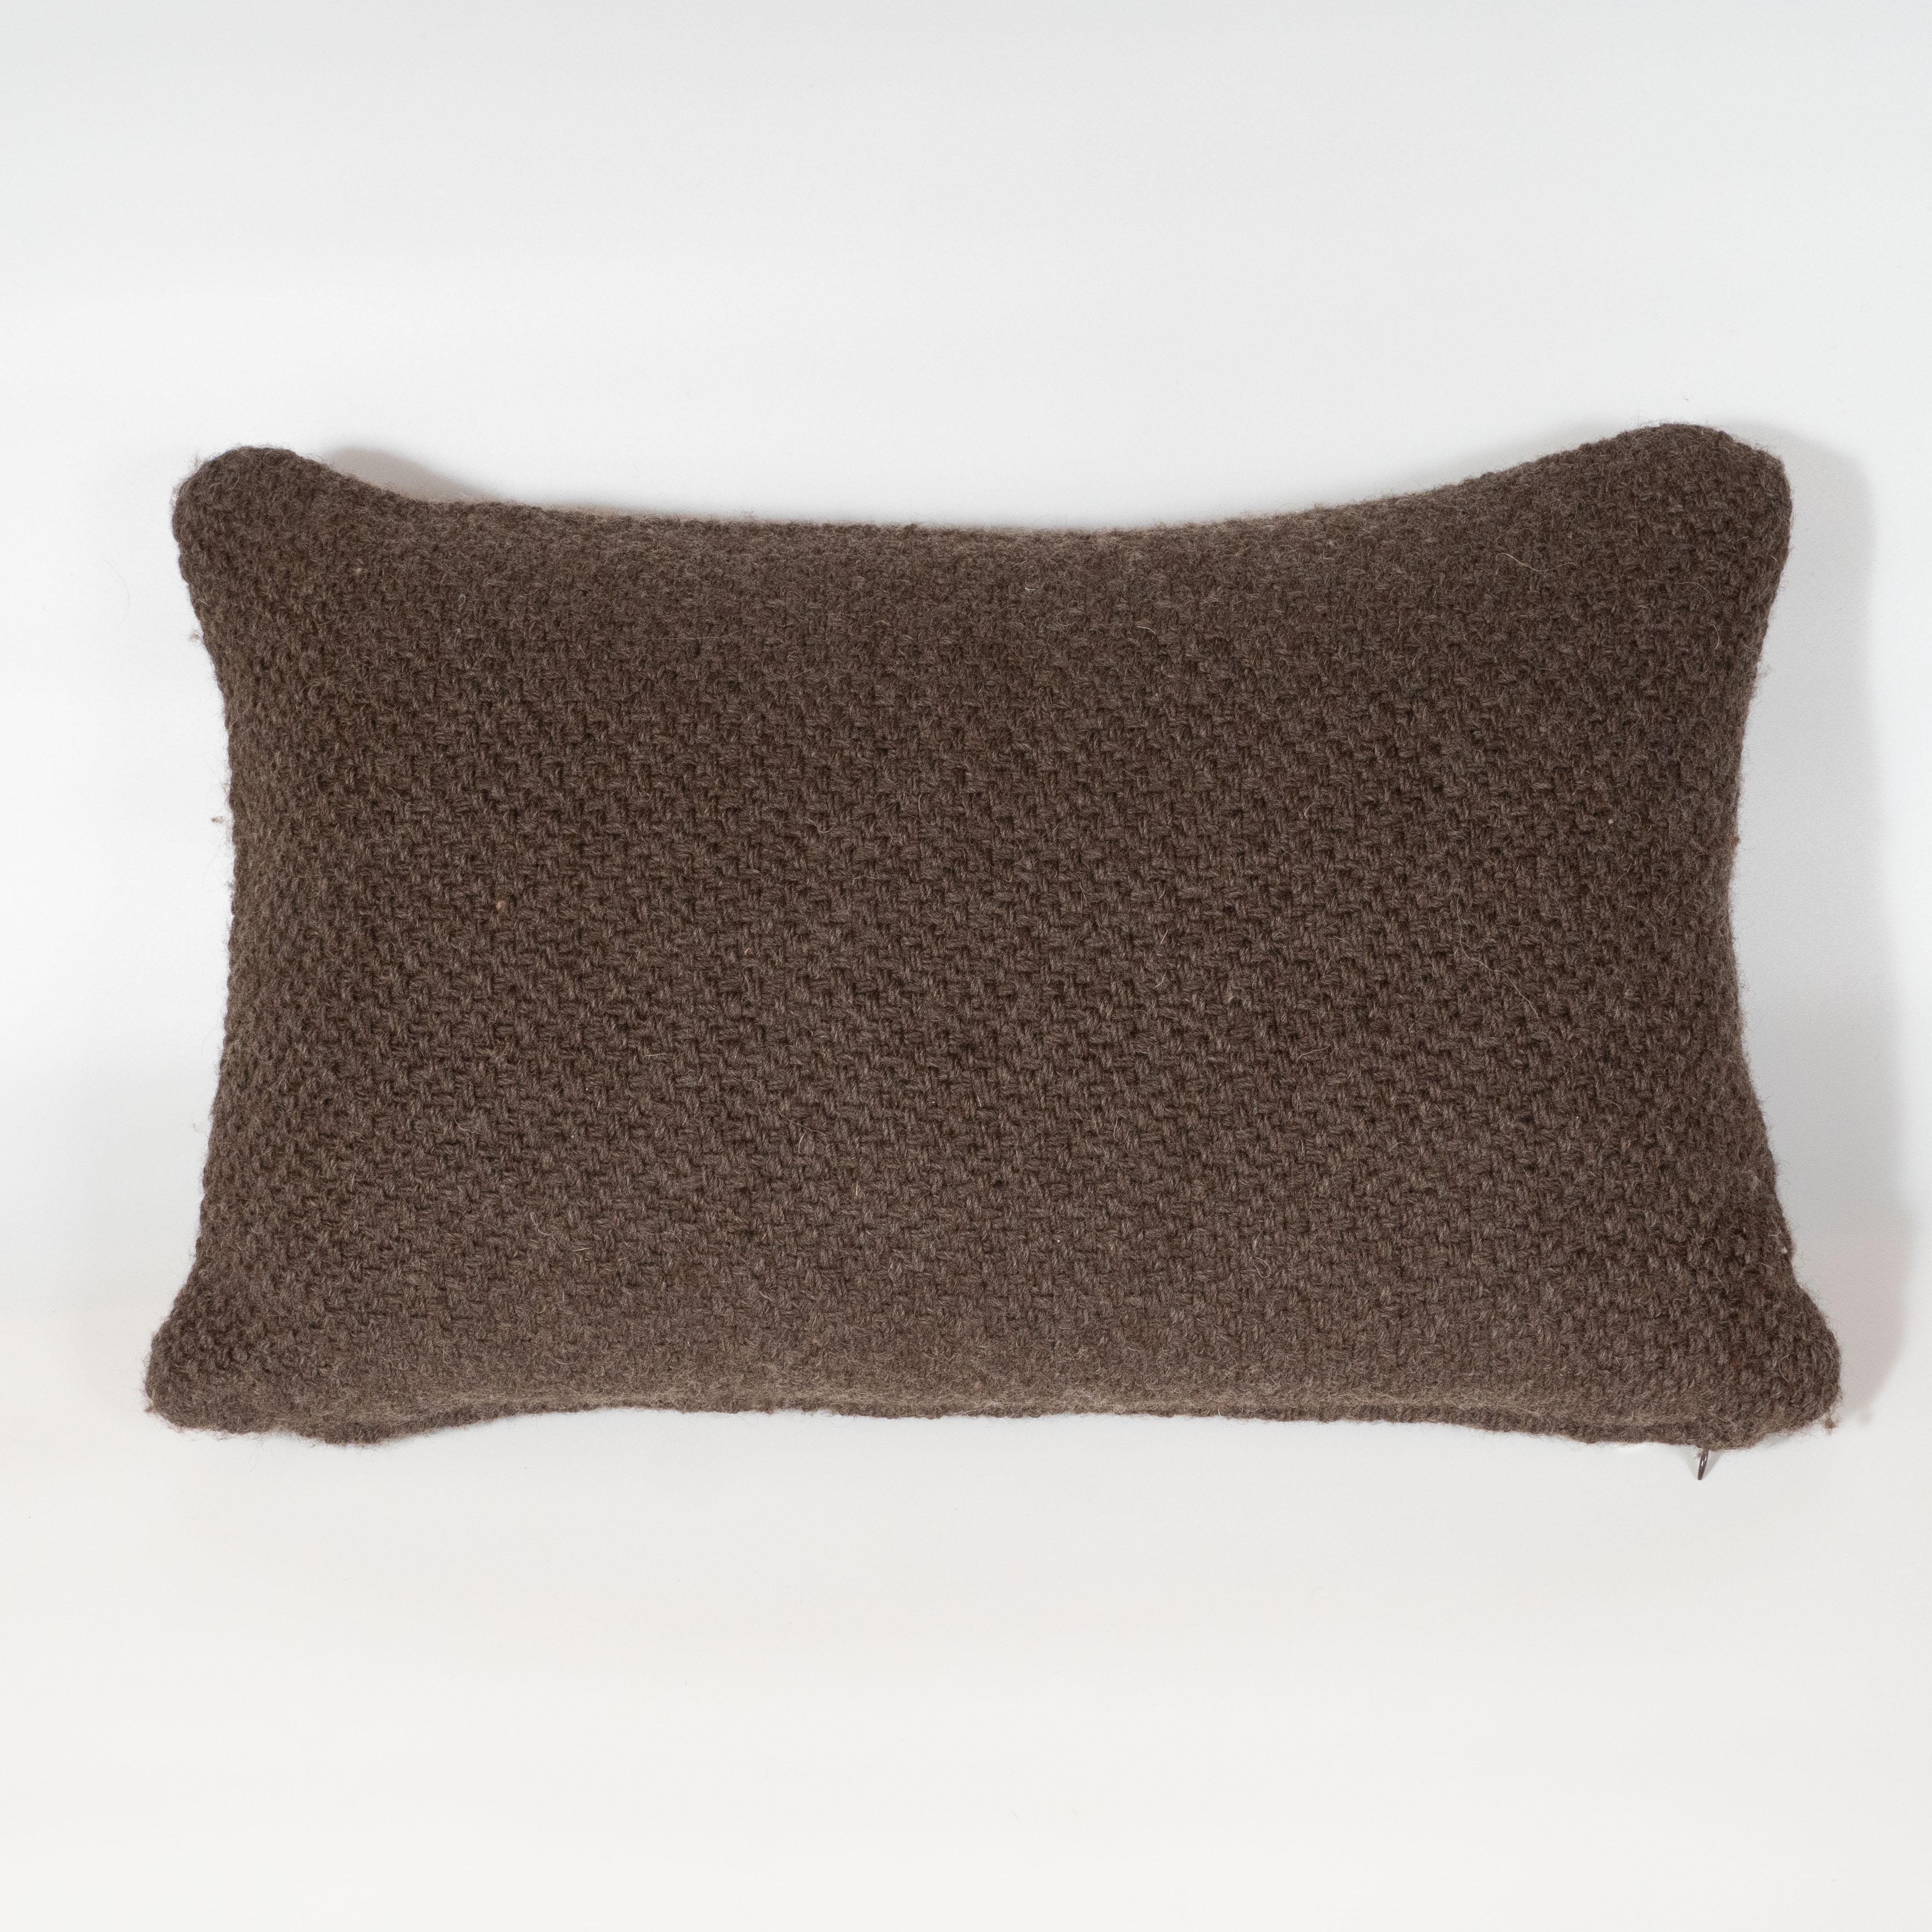 This beautiful espresso pillow is handmade in the mountainous regions of Patagonia, Argentina. Realized in an Alpaca/Merino wool blend, it offers a basket weave pattern in heather. Soft, luxuriously, and exquisitely crafted, this pillow promises to